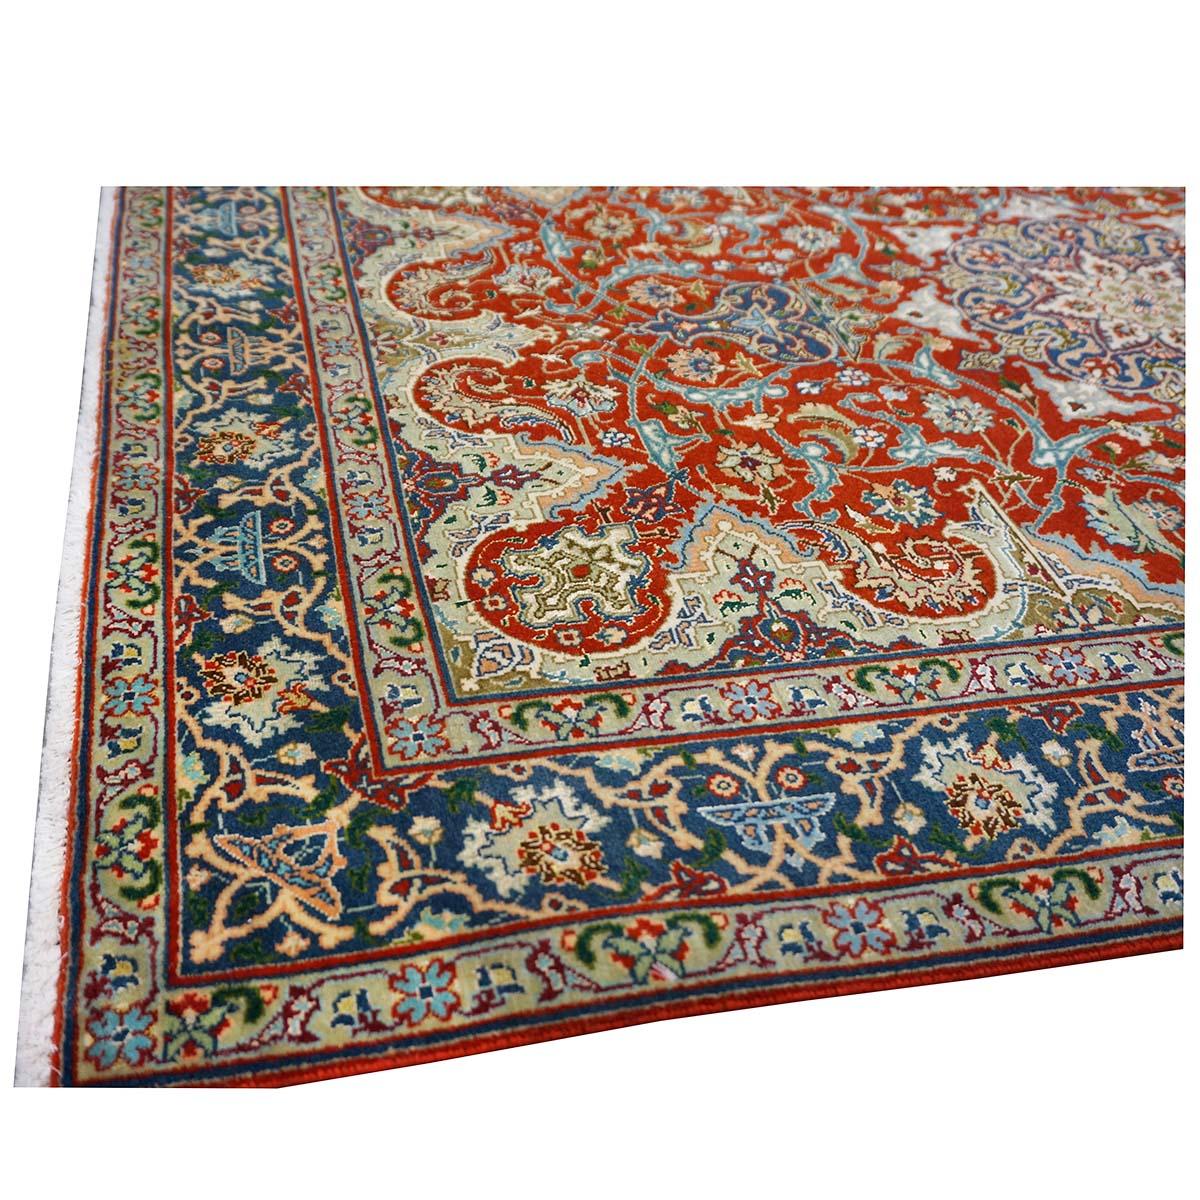 Wool Antique 1940s Fine Persian Tabriz 3x4 Red, Navy, & Blue Handmade Area Rug For Sale